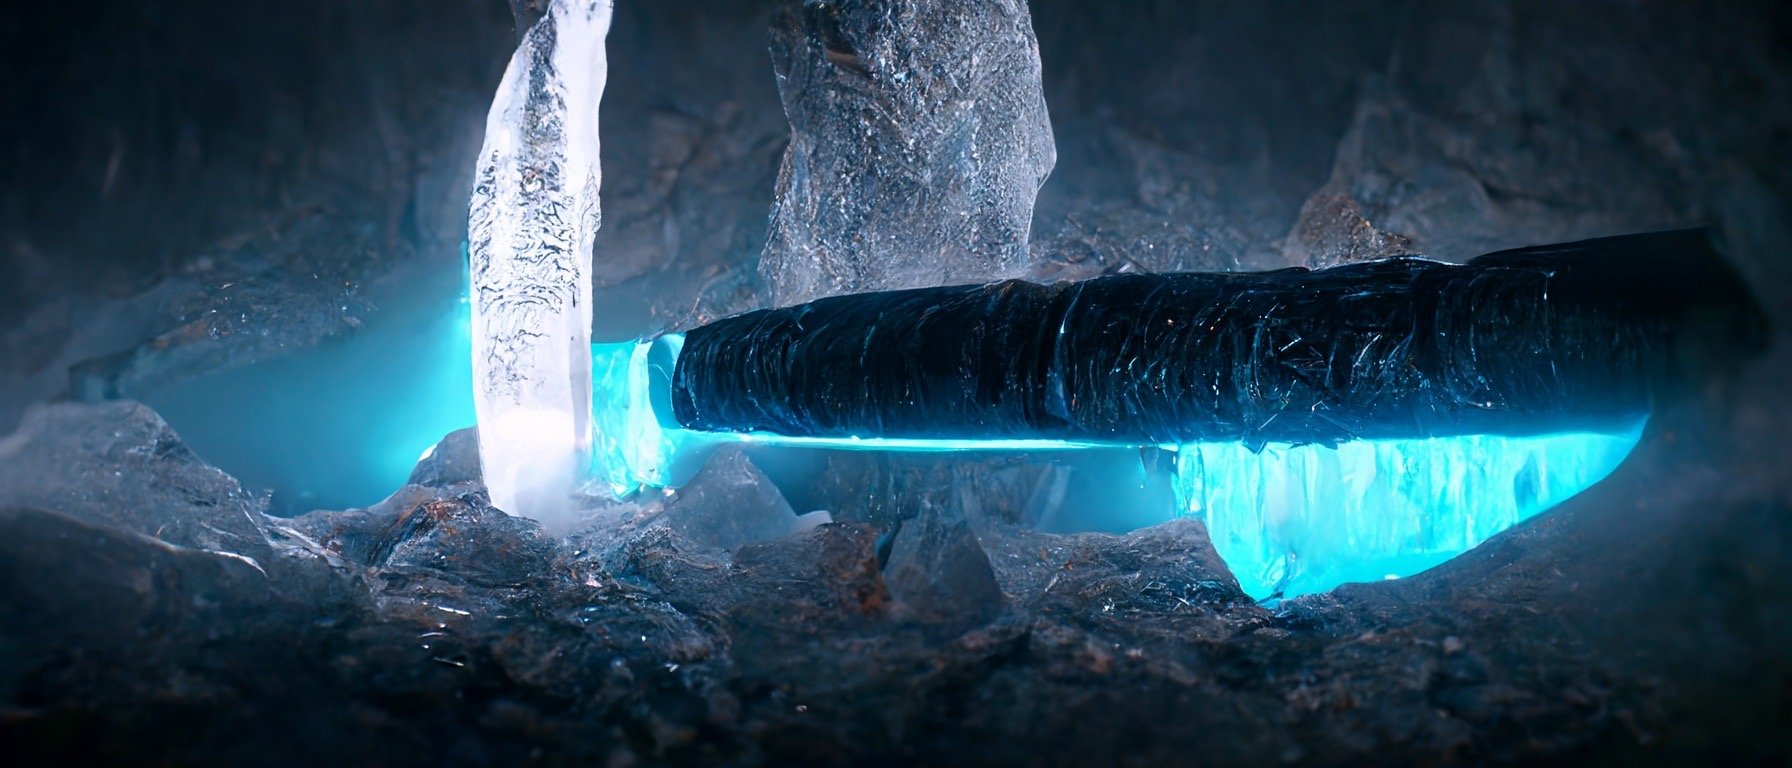 2e255001-c597-474a-9e59-ce6287b90cfb_S3RAPH_frozen_steal_Japanese_sword_katana_as_the_focal_point._in_an_ice_cave_with_reflective_crystals._thre.JPG